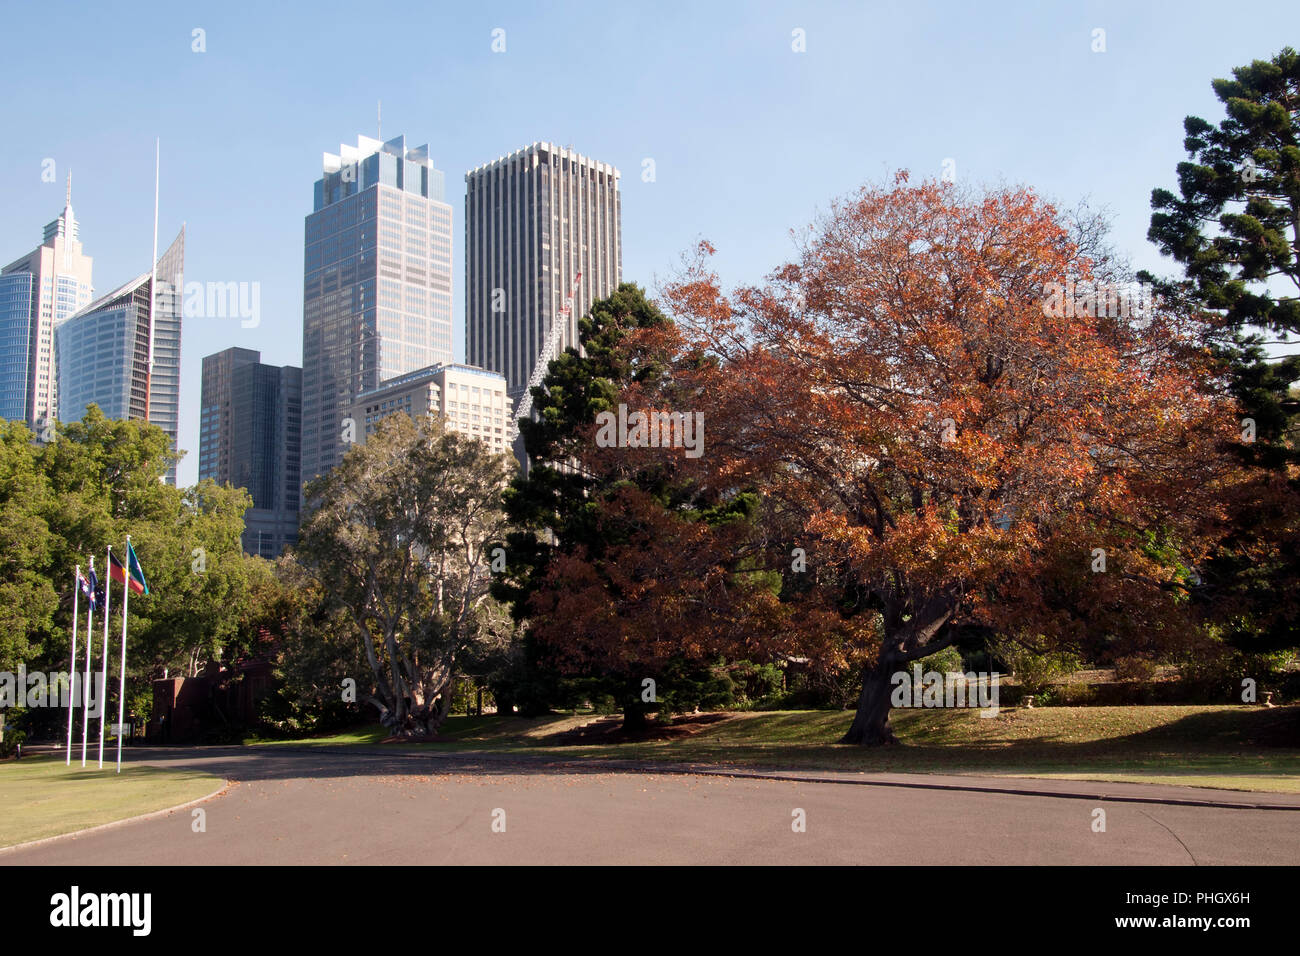 Sydney Australia, view of city buildings from  botanical gardens in autumn Stock Photo